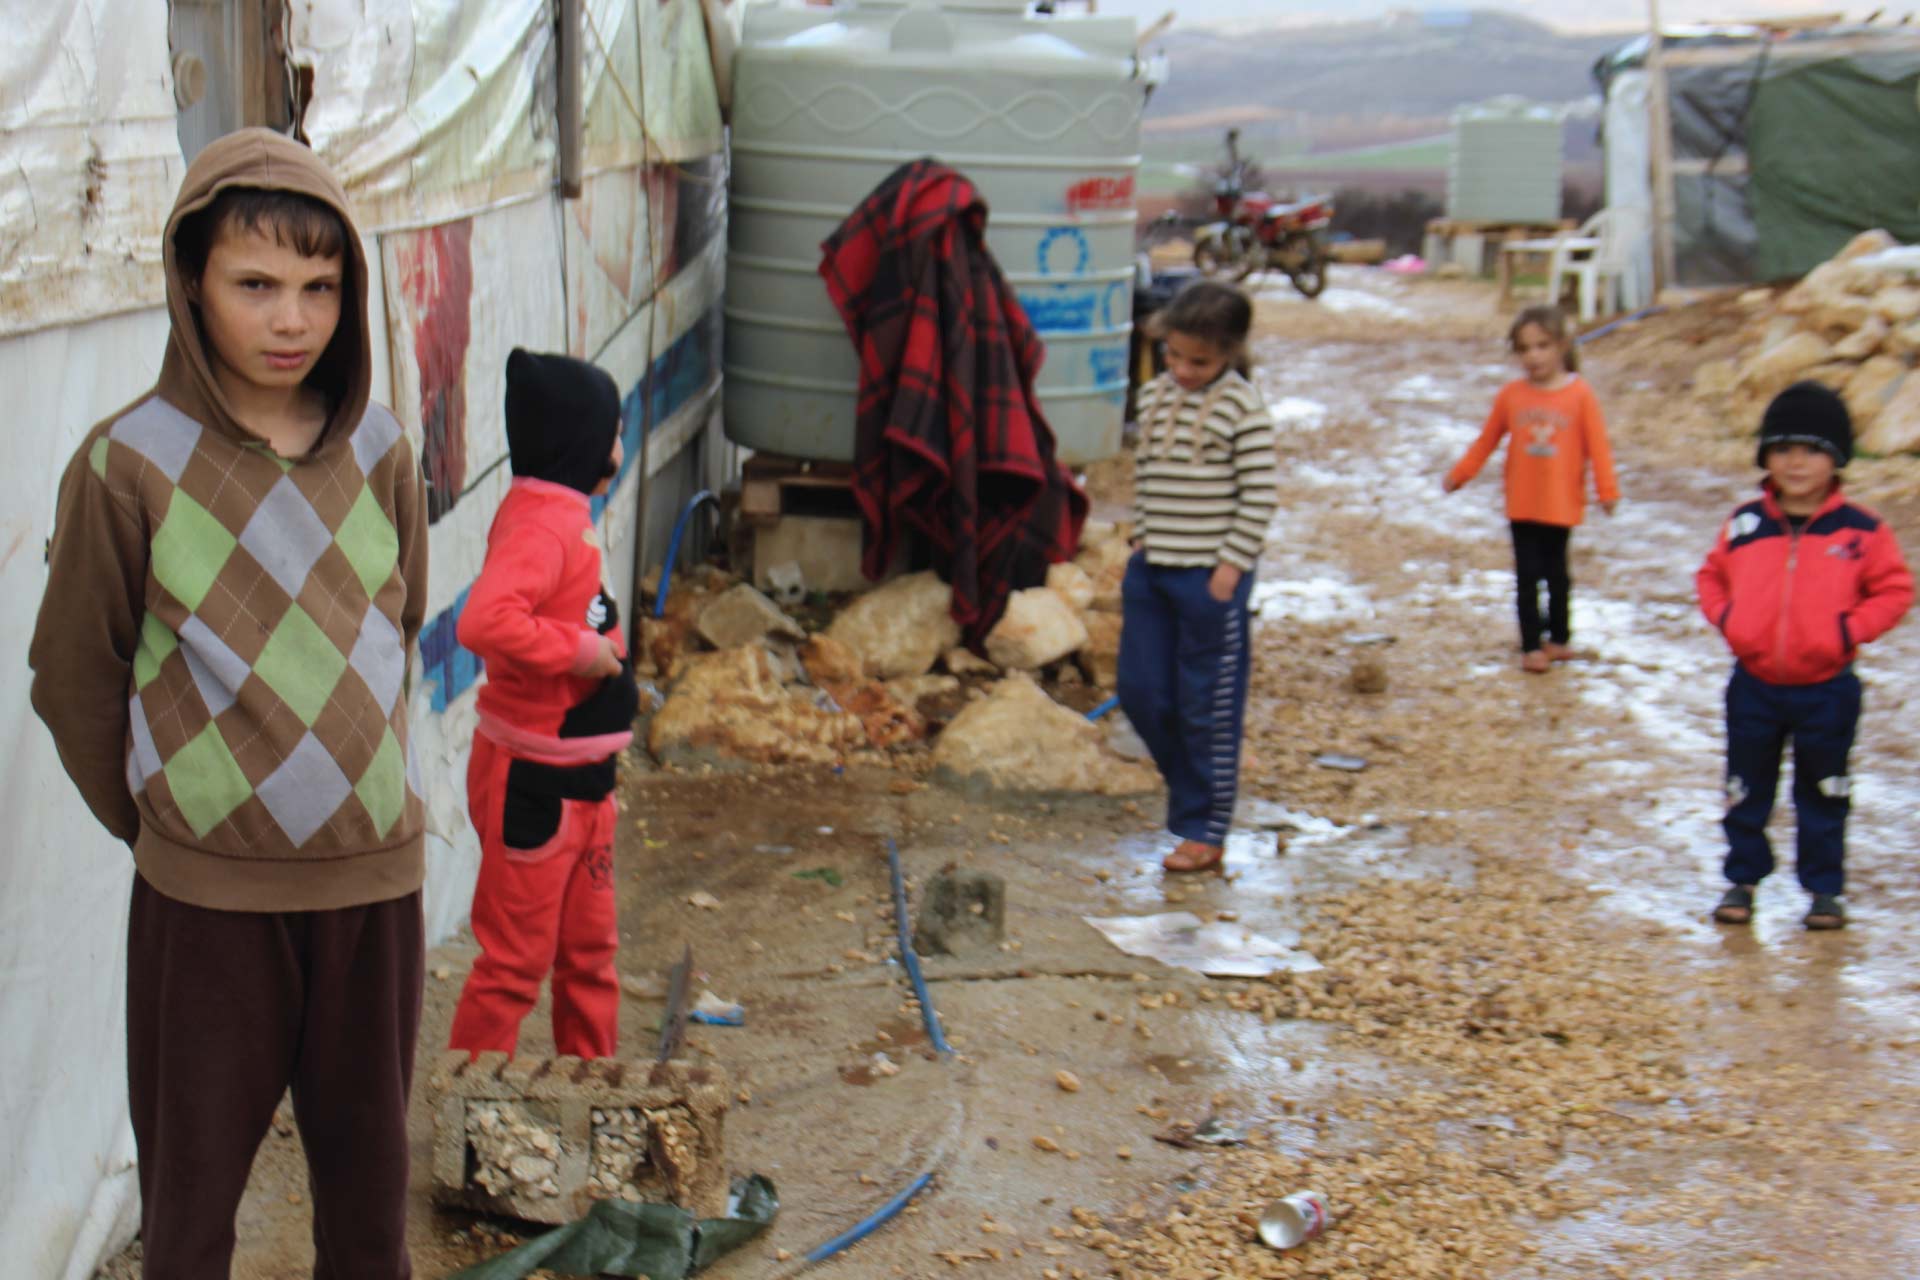 Child in refugee camps